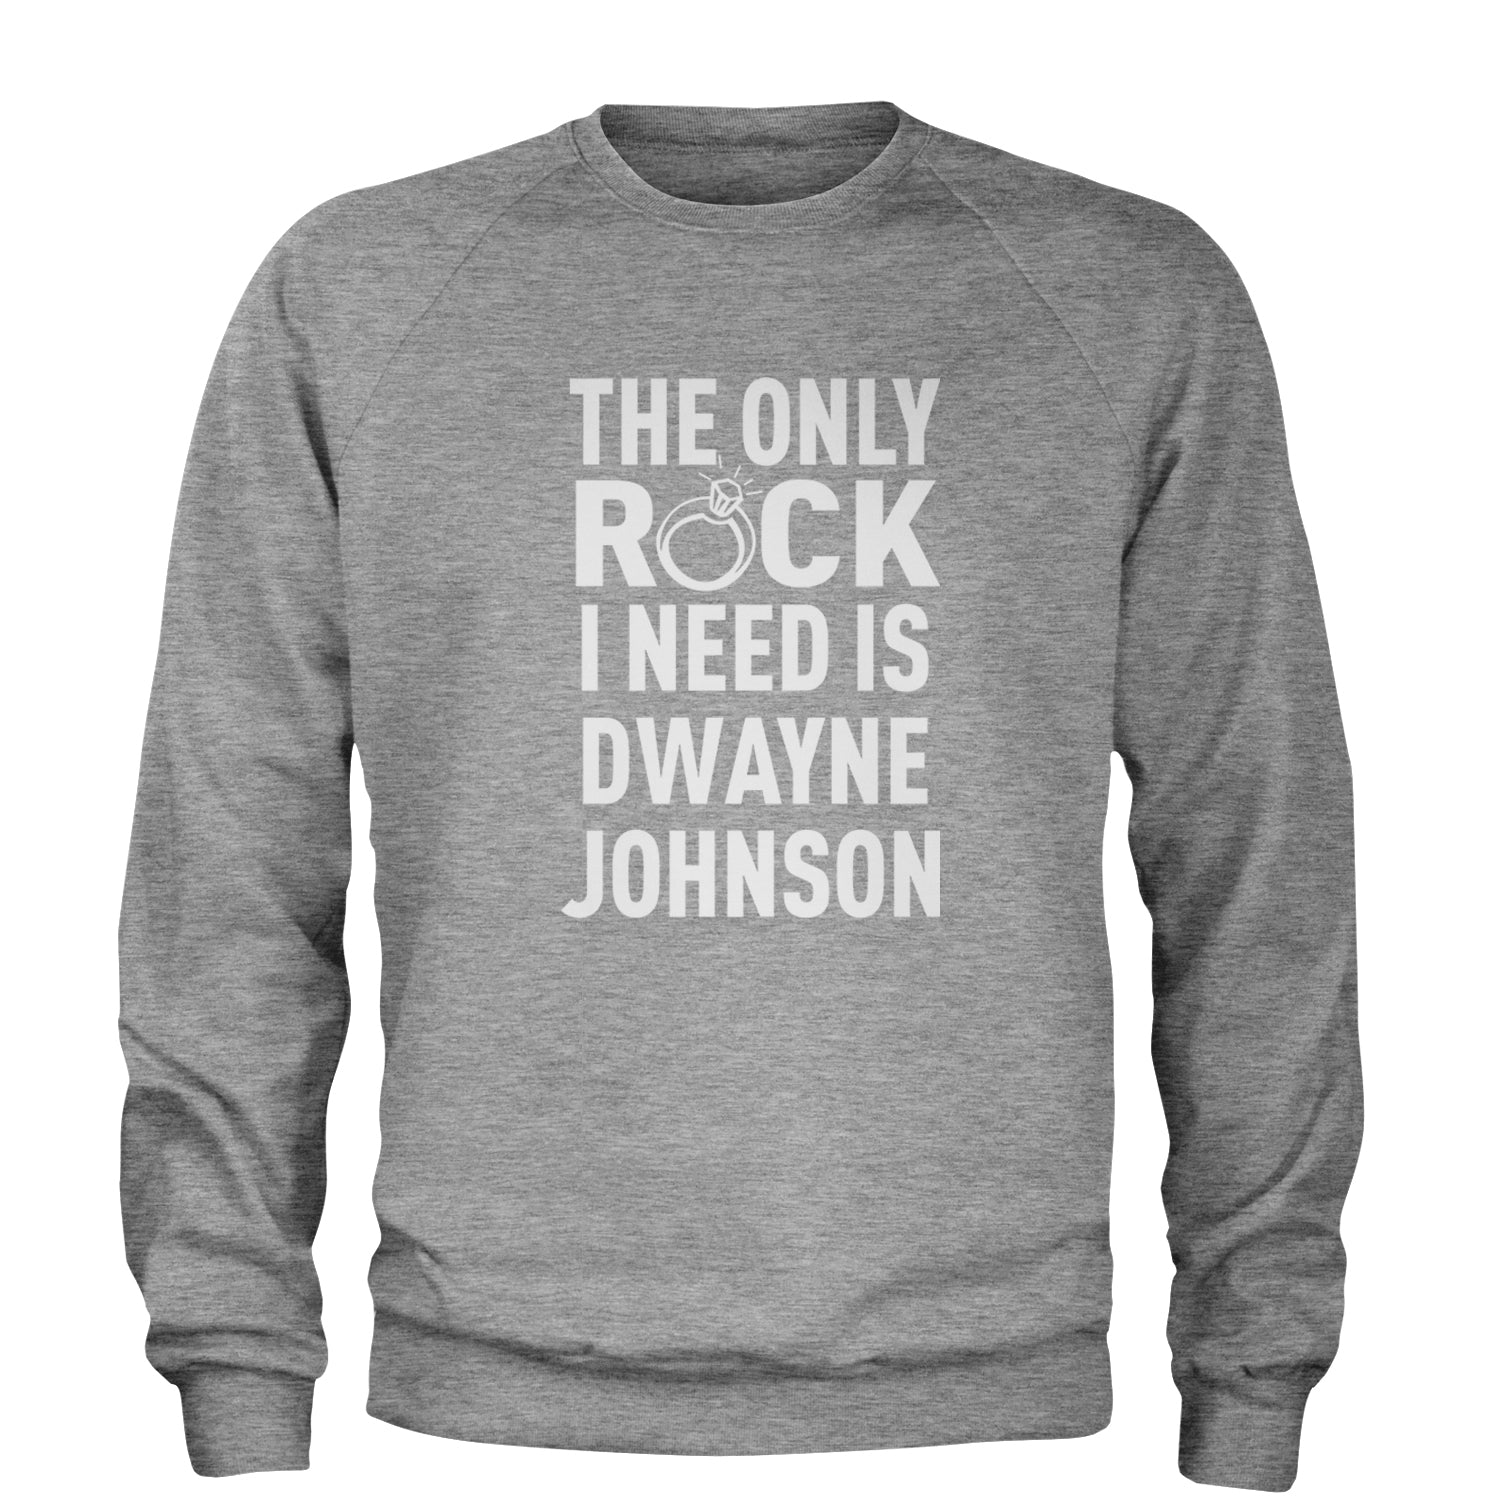 The Only Rock I Need Is Dwayne Johnson Adult Crewneck Sweatshirt dwayne, johnson, marry, me, ring, rock, the, wedding by Expression Tees